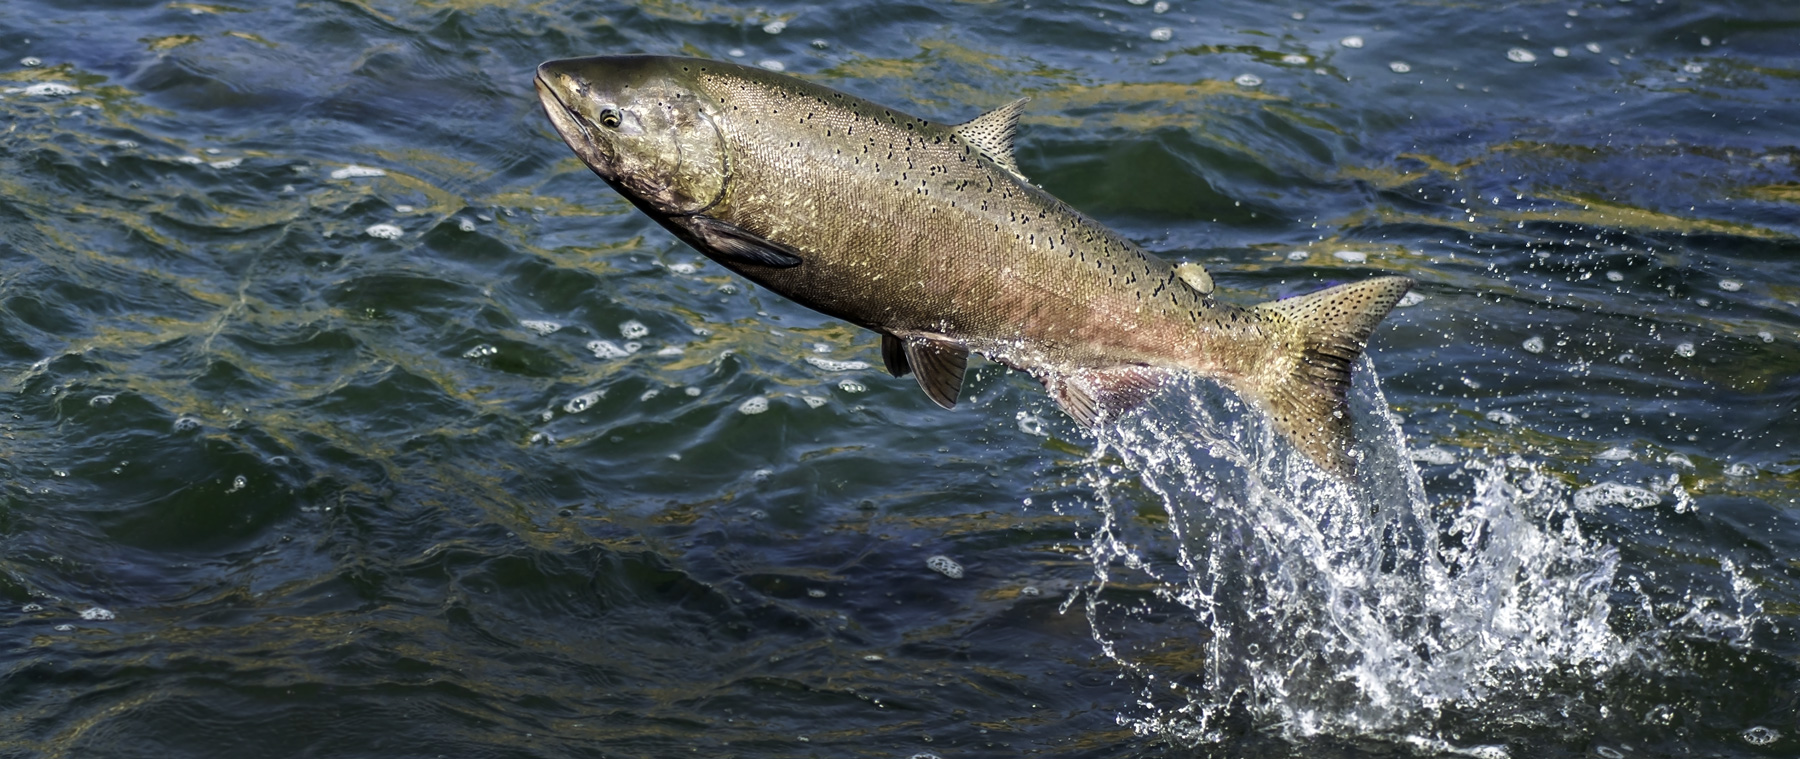 Chinook salmon jumping out of the water.